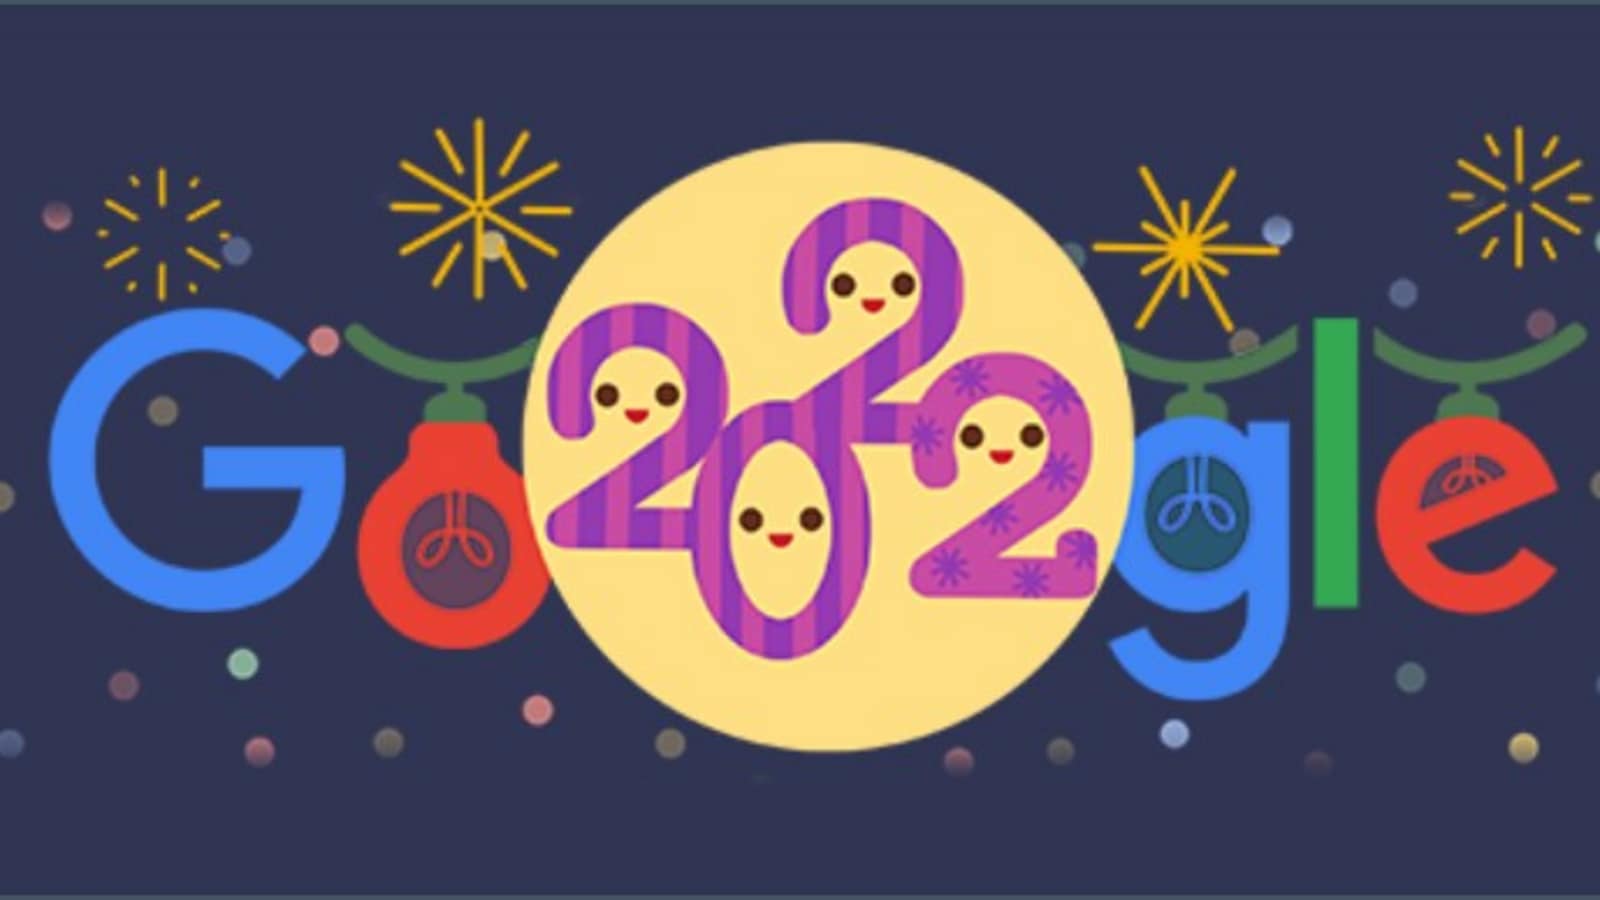 Google Doodle New Year Eve Latest 1672469684429 1672469694377 1672469694377.PNG